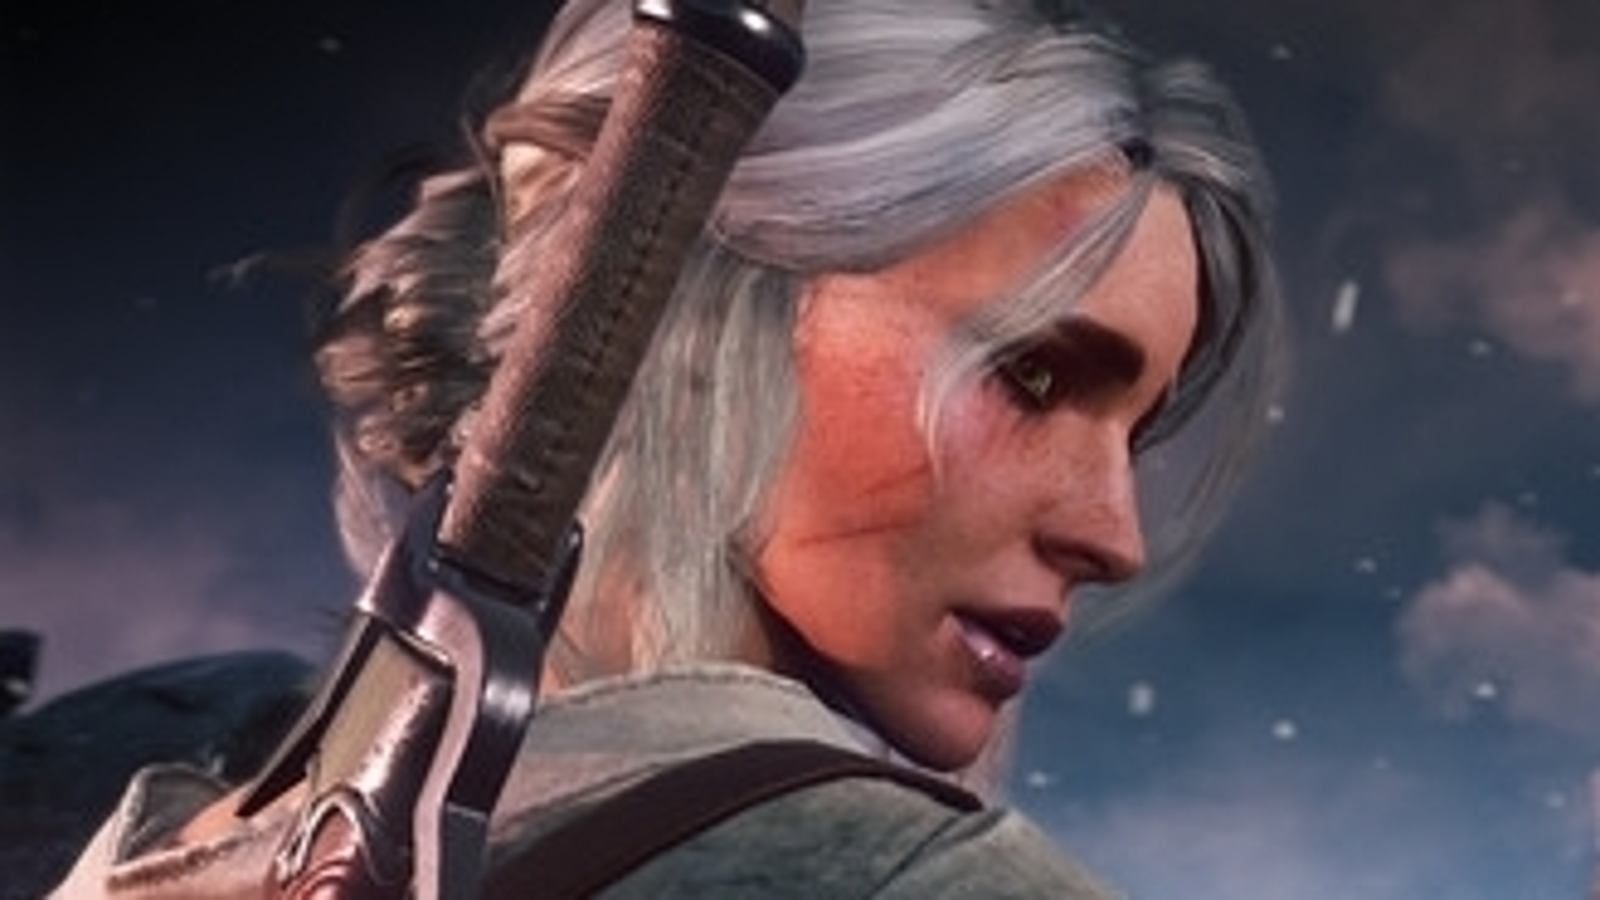 The Witcher 2 Epilogue, Witcher Wiki